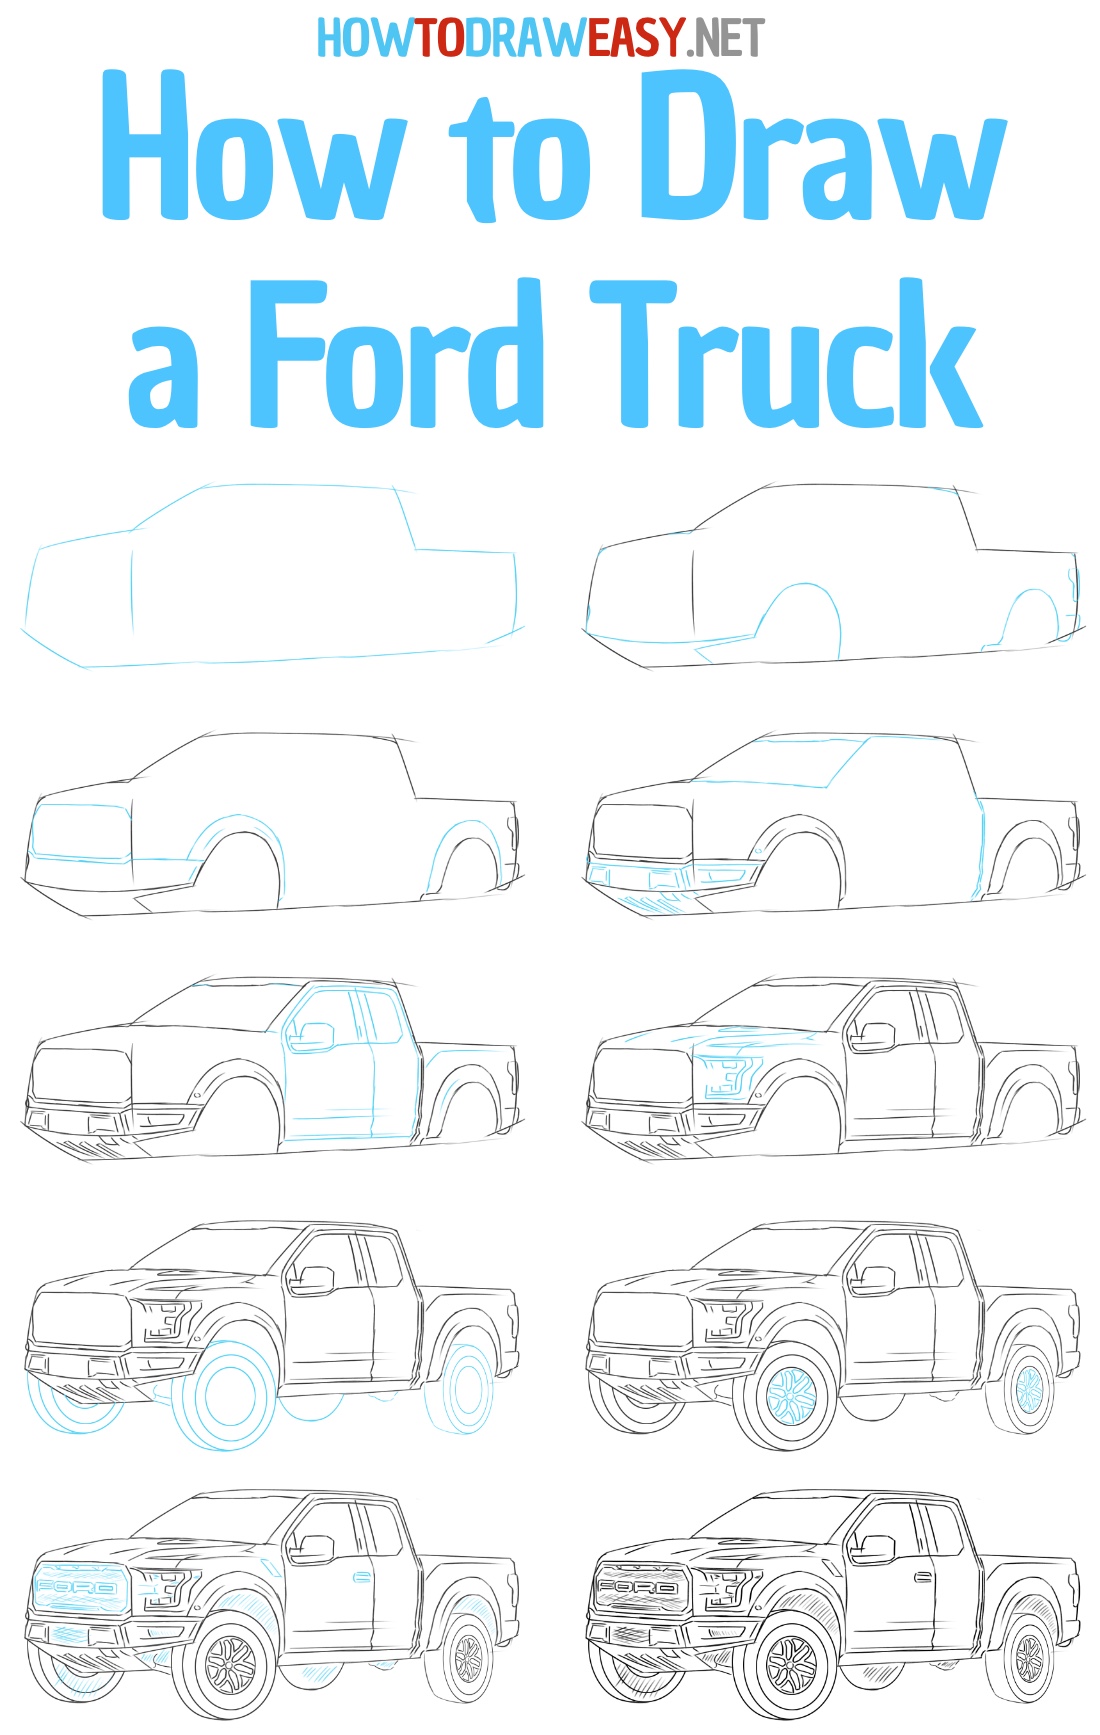 How to Draw a Ford Truck Step by Step